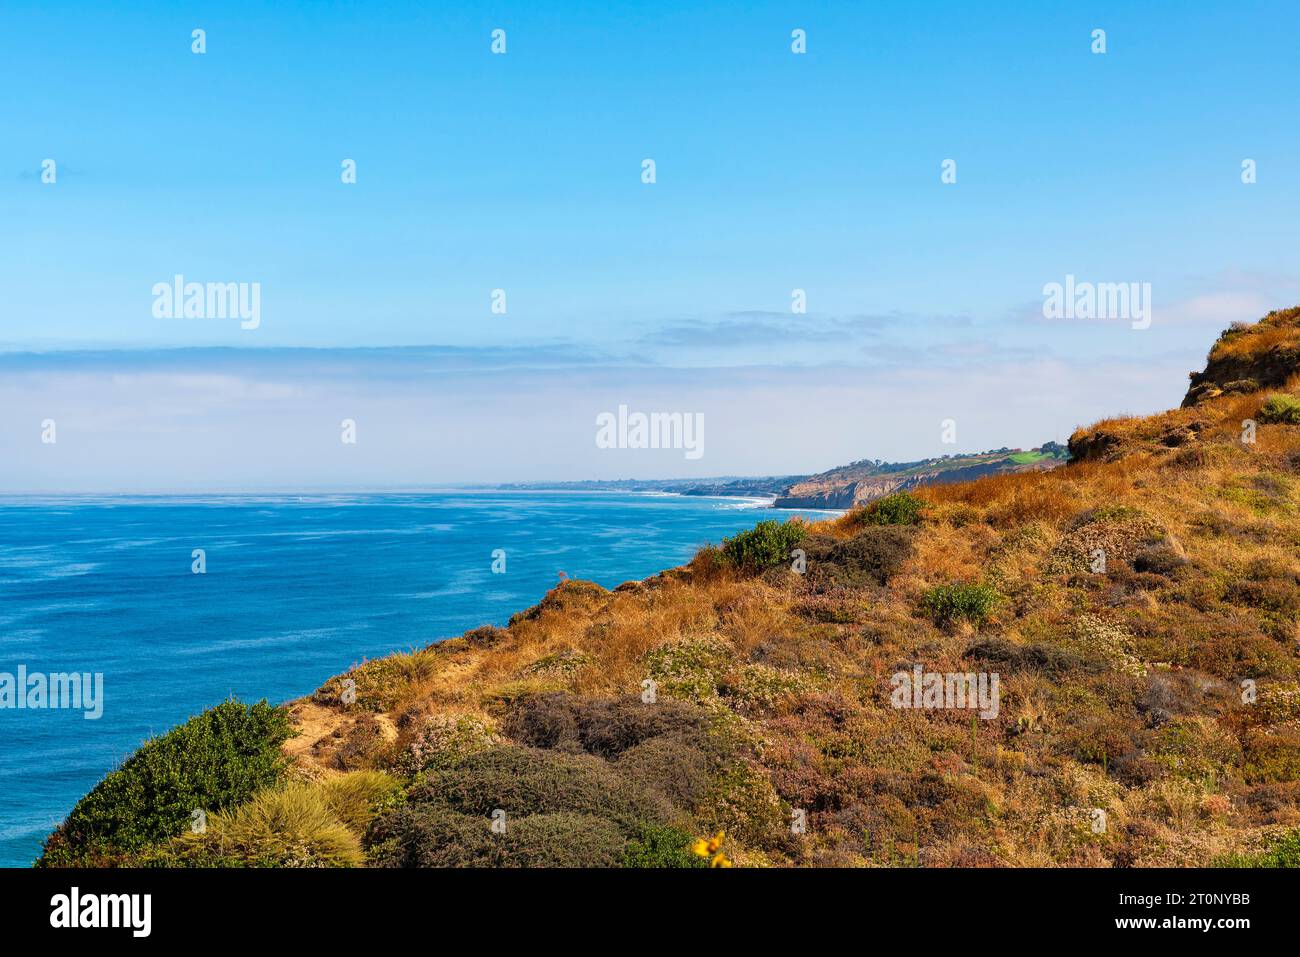 A view of the Pacific Ocean, the hillside, and the cliffs of La Jolla (San Diego), California, USA, looking north to Torrey Pines and beyond Stock Photo